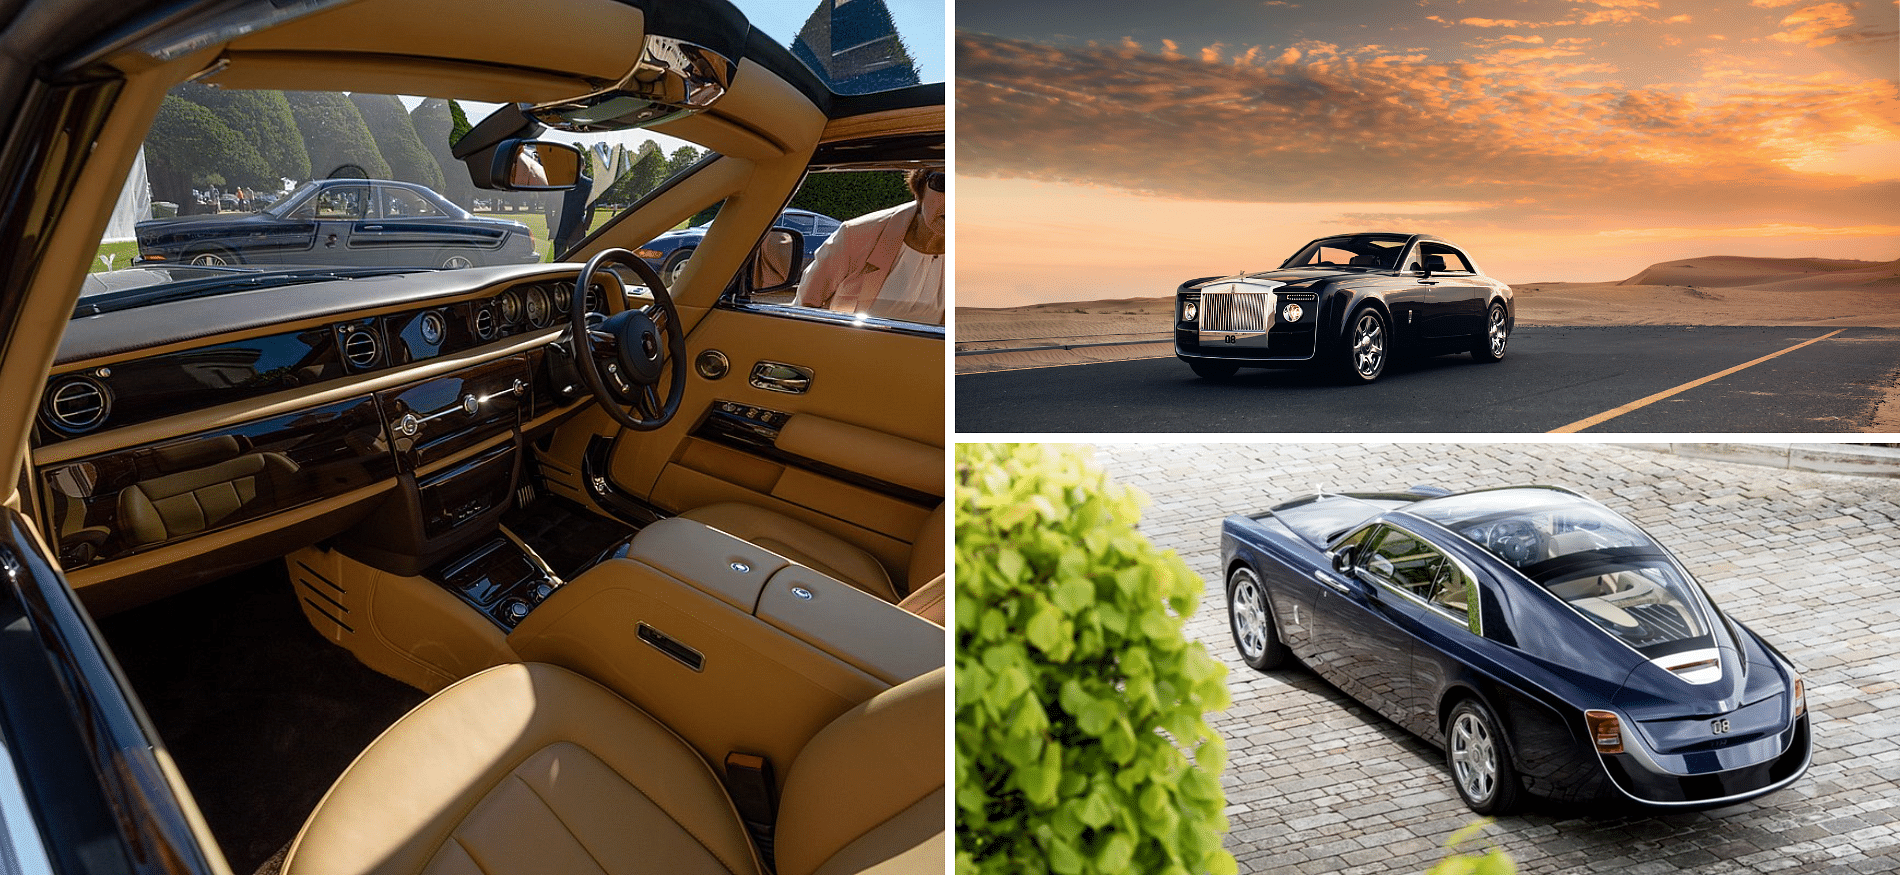 13 Million RollsRoyce Sweptail May Be Most Expensive New Car Ever   Carscoops